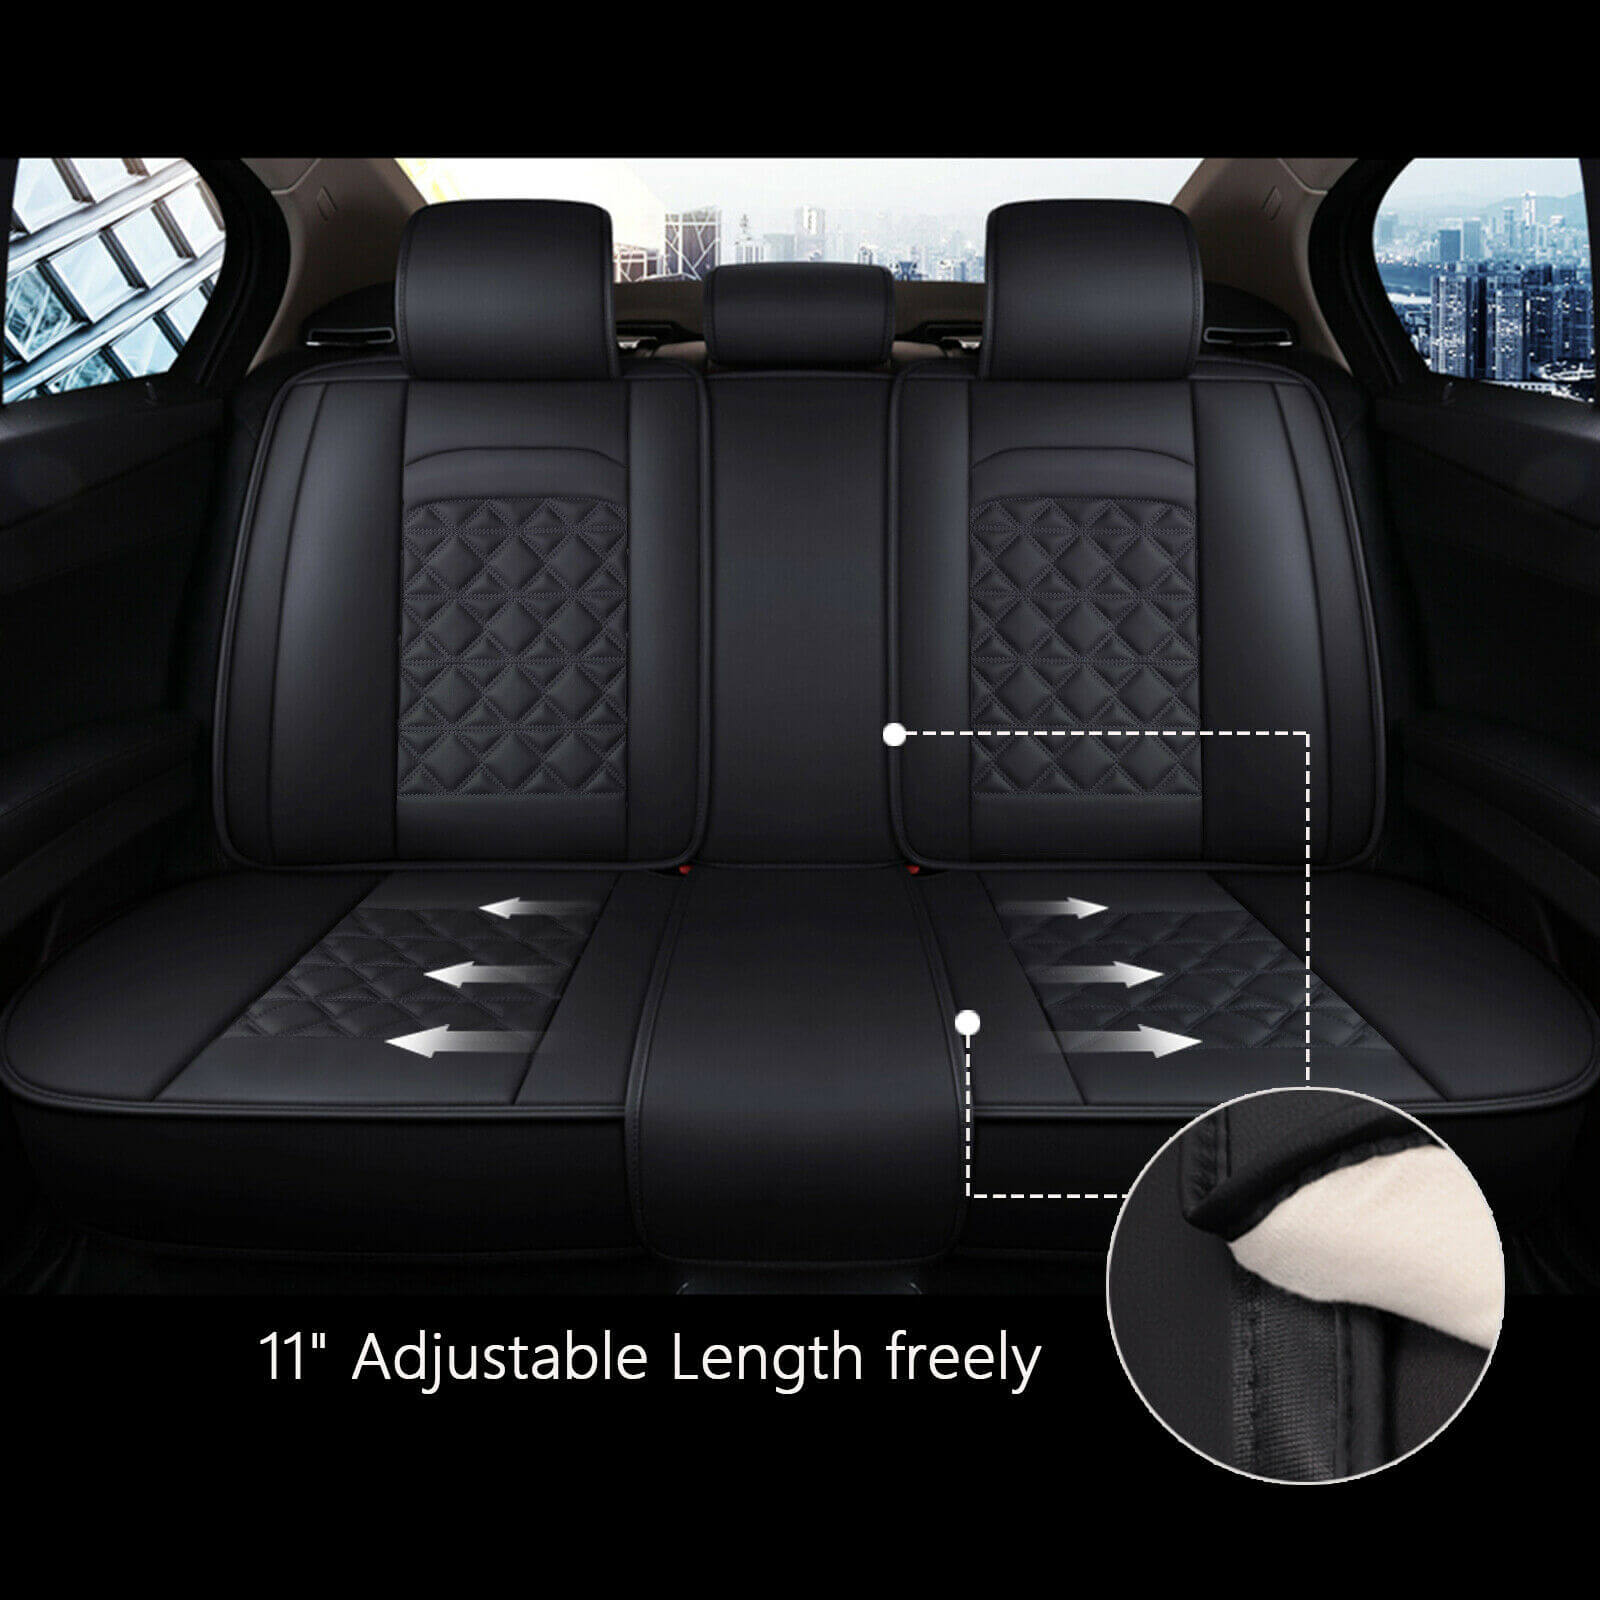 Design of Universal Full Surrounded Leather Car Seat Covers